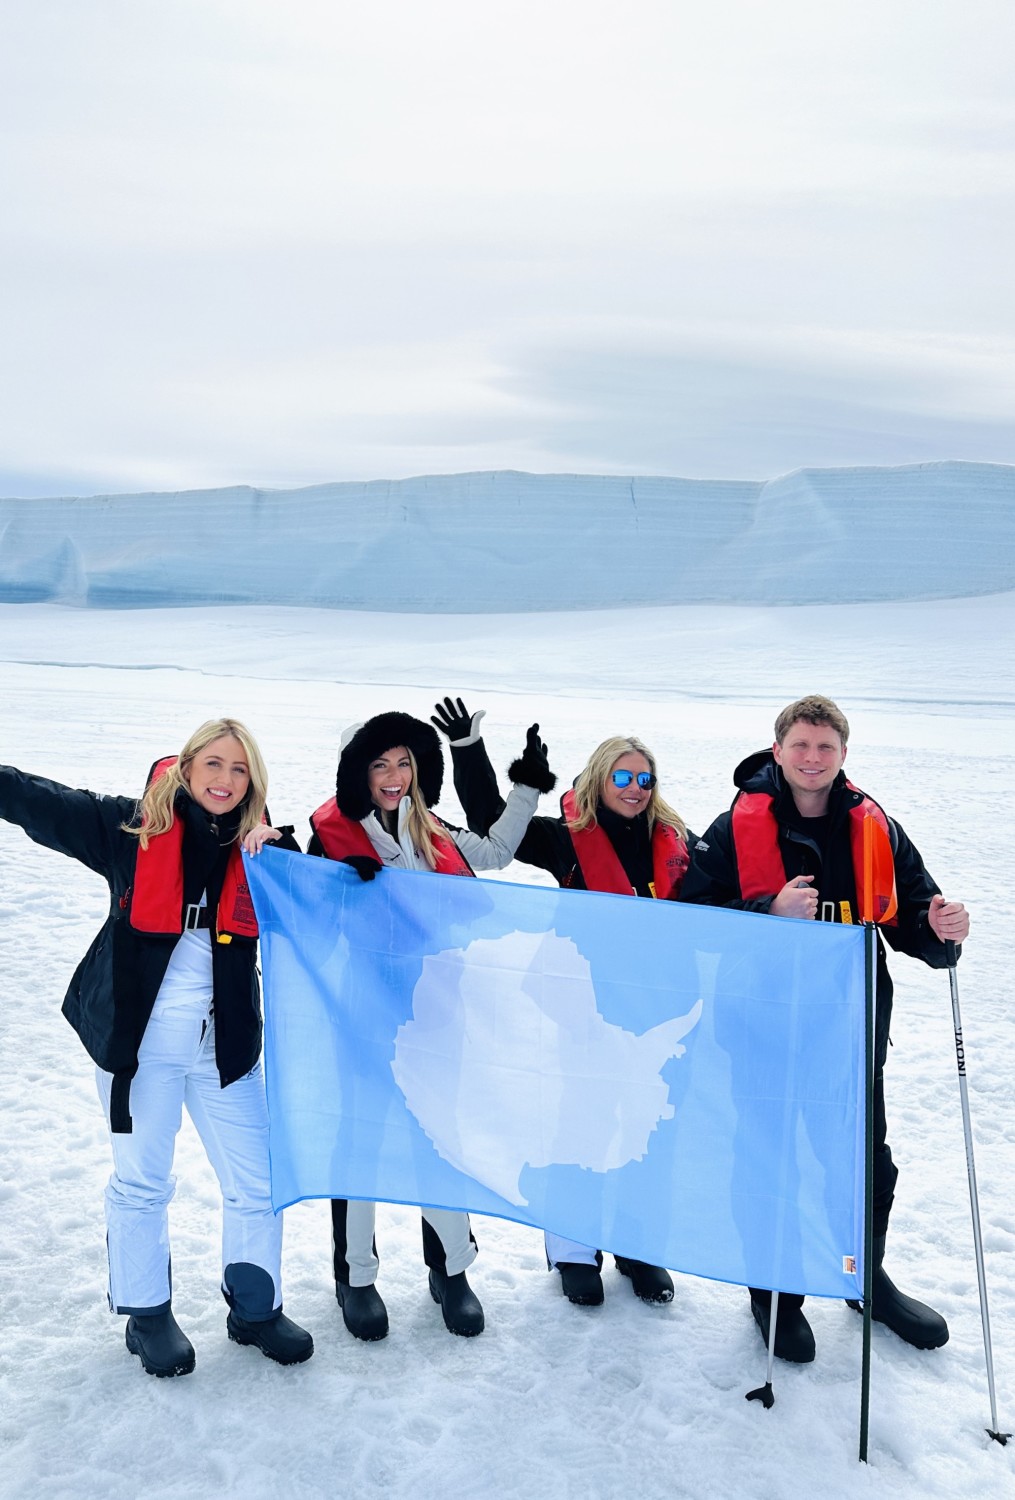 A group of people on ice holding up a blue flag and posing for a photo